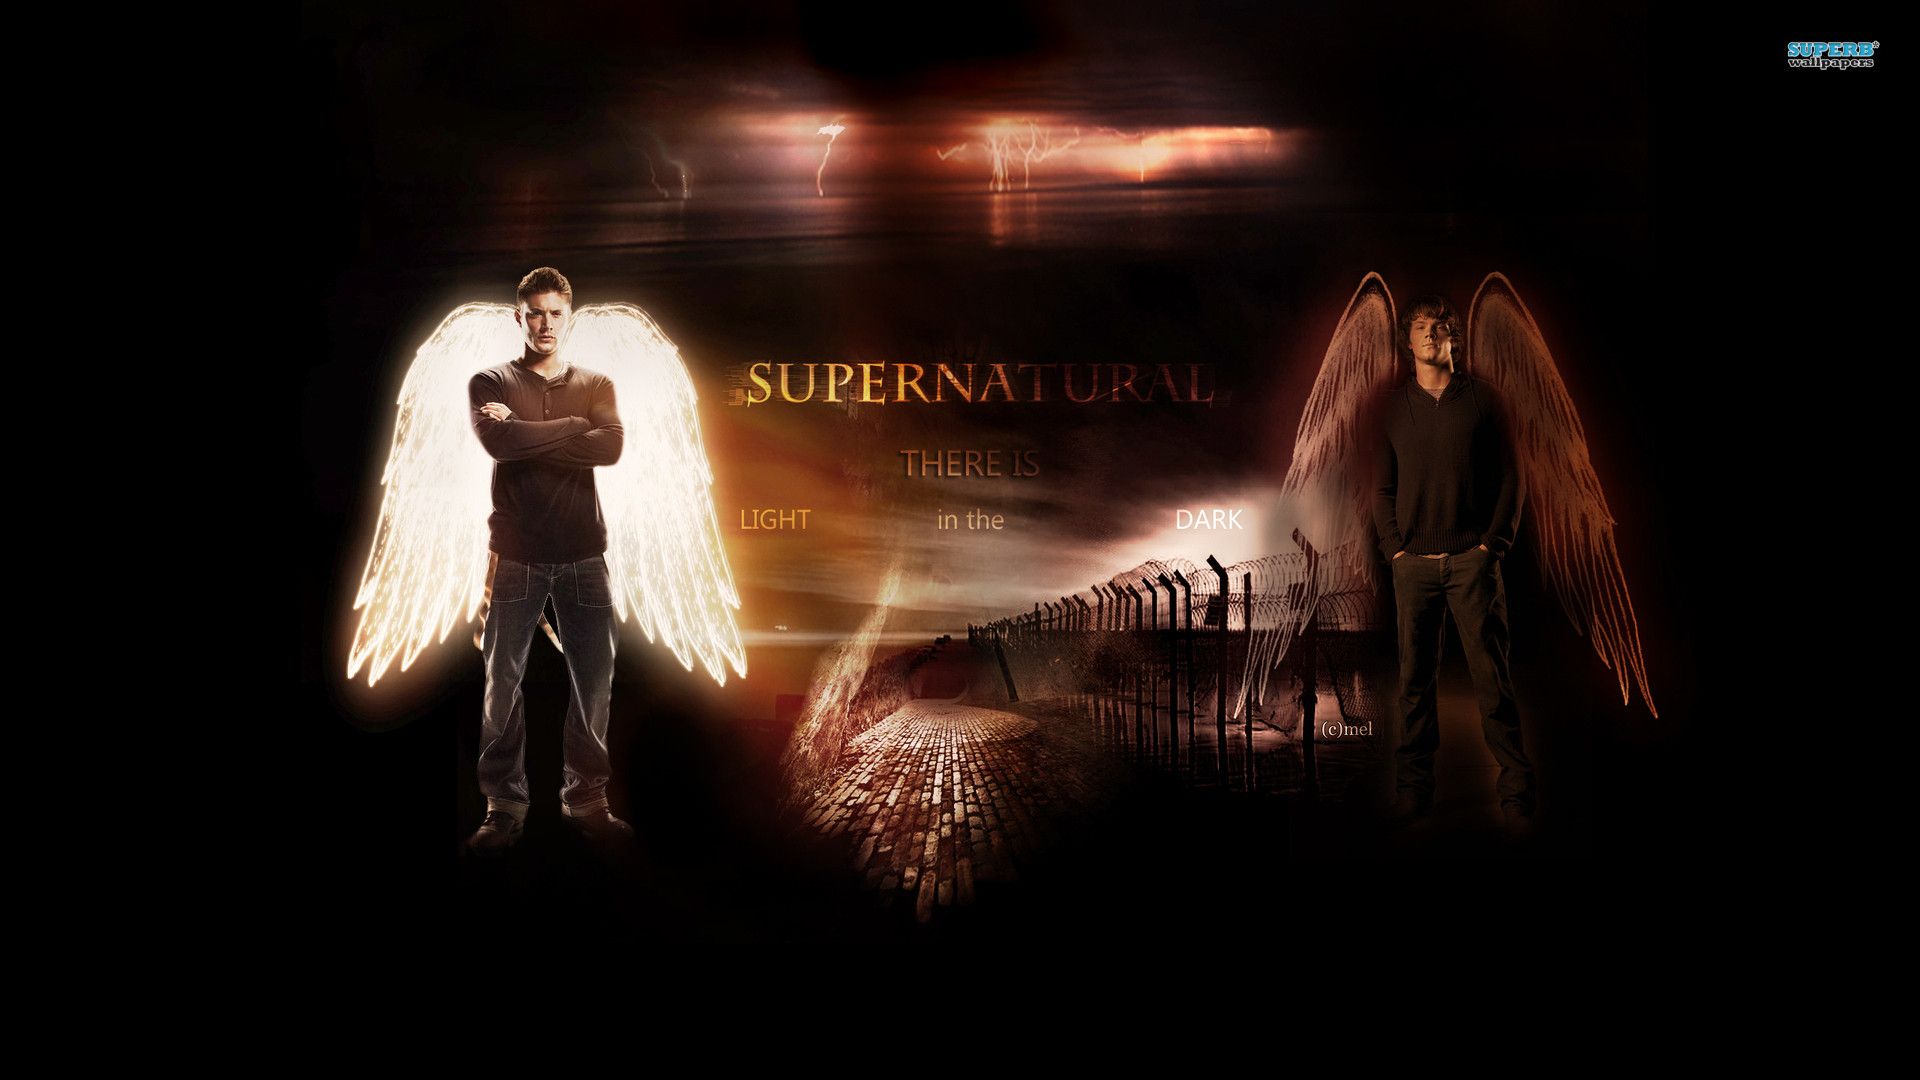 Cute Supernatural Wallpapers Px, - Sam And Dean With Wings - HD Wallpaper 